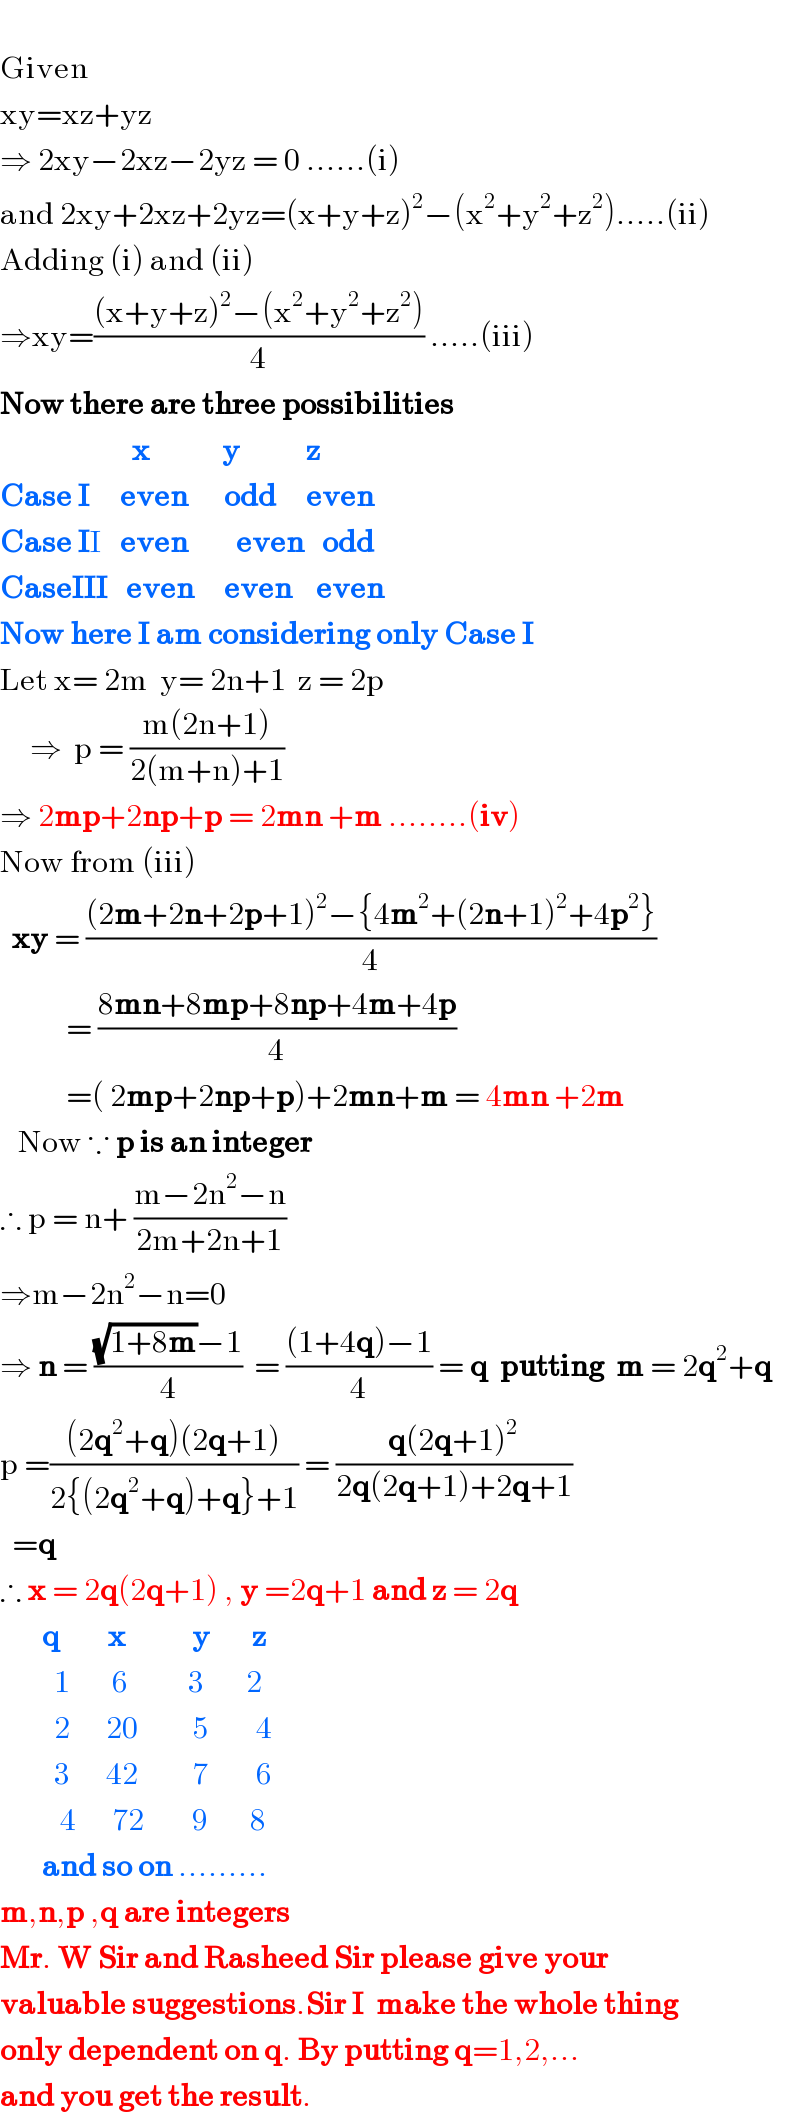   Given  xy=xz+yz  ⇒ 2xy−2xz−2yz = 0 ......(i)  and 2xy+2xz+2yz=(x+y+z)^2 −(x^2 +y^2 +z^2 ).....(ii)  Adding (i) and (ii)  ⇒xy=(((x+y+z)^2 −(x^2 +y^2 +z^2 ))/4) .....(iii)  Now there are three possibilities                        x            y           z  Case I     even      odd     even  Case II   even        even   odd  CaseIII   even     even    even  Now here I am considering only Case I   Let x= 2m  y= 2n+1  z = 2p       ⇒  p = ((m(2n+1))/(2(m+n)+1))  ⇒ 2mp+2np+p = 2mn +m ........(iv)  Now from (iii)    xy = (((2m+2n+2p+1)^2 −{4m^2 +(2n+1)^2 +4p^2 })/4)             = ((8mn+8mp+8np+4m+4p)/4)             =( 2mp+2np+p)+2mn+m = 4mn +2m     Now ∵ p is an integer  ∴ p = n+ ((m−2n^2 −n)/(2m+2n+1))  ⇒m−2n^2 −n=0  ⇒ n = (((√(1+8m))−1)/4)  = (((1+4q)−1)/4) = q  putting  m = 2q^2 +q  p =(((2q^2 +q)(2q+1))/(2{(2q^2 +q)+q}+1)) = ((q(2q+1)^2 )/(2q(2q+1)+2q+1))    =q  ∴ x = 2q(2q+1) , y =2q+1 and z = 2q         q        x           y       z           1       6          3       2           2      20         5        4           3      42         7        6            4      72        9       8         and so on .........  m,n,p ,q are integers  Mr. W Sir and Rasheed Sir please give your  valuable suggestions.Sir I  make the whole thing   only dependent on q. By putting q=1,2,...  and you get the result.  